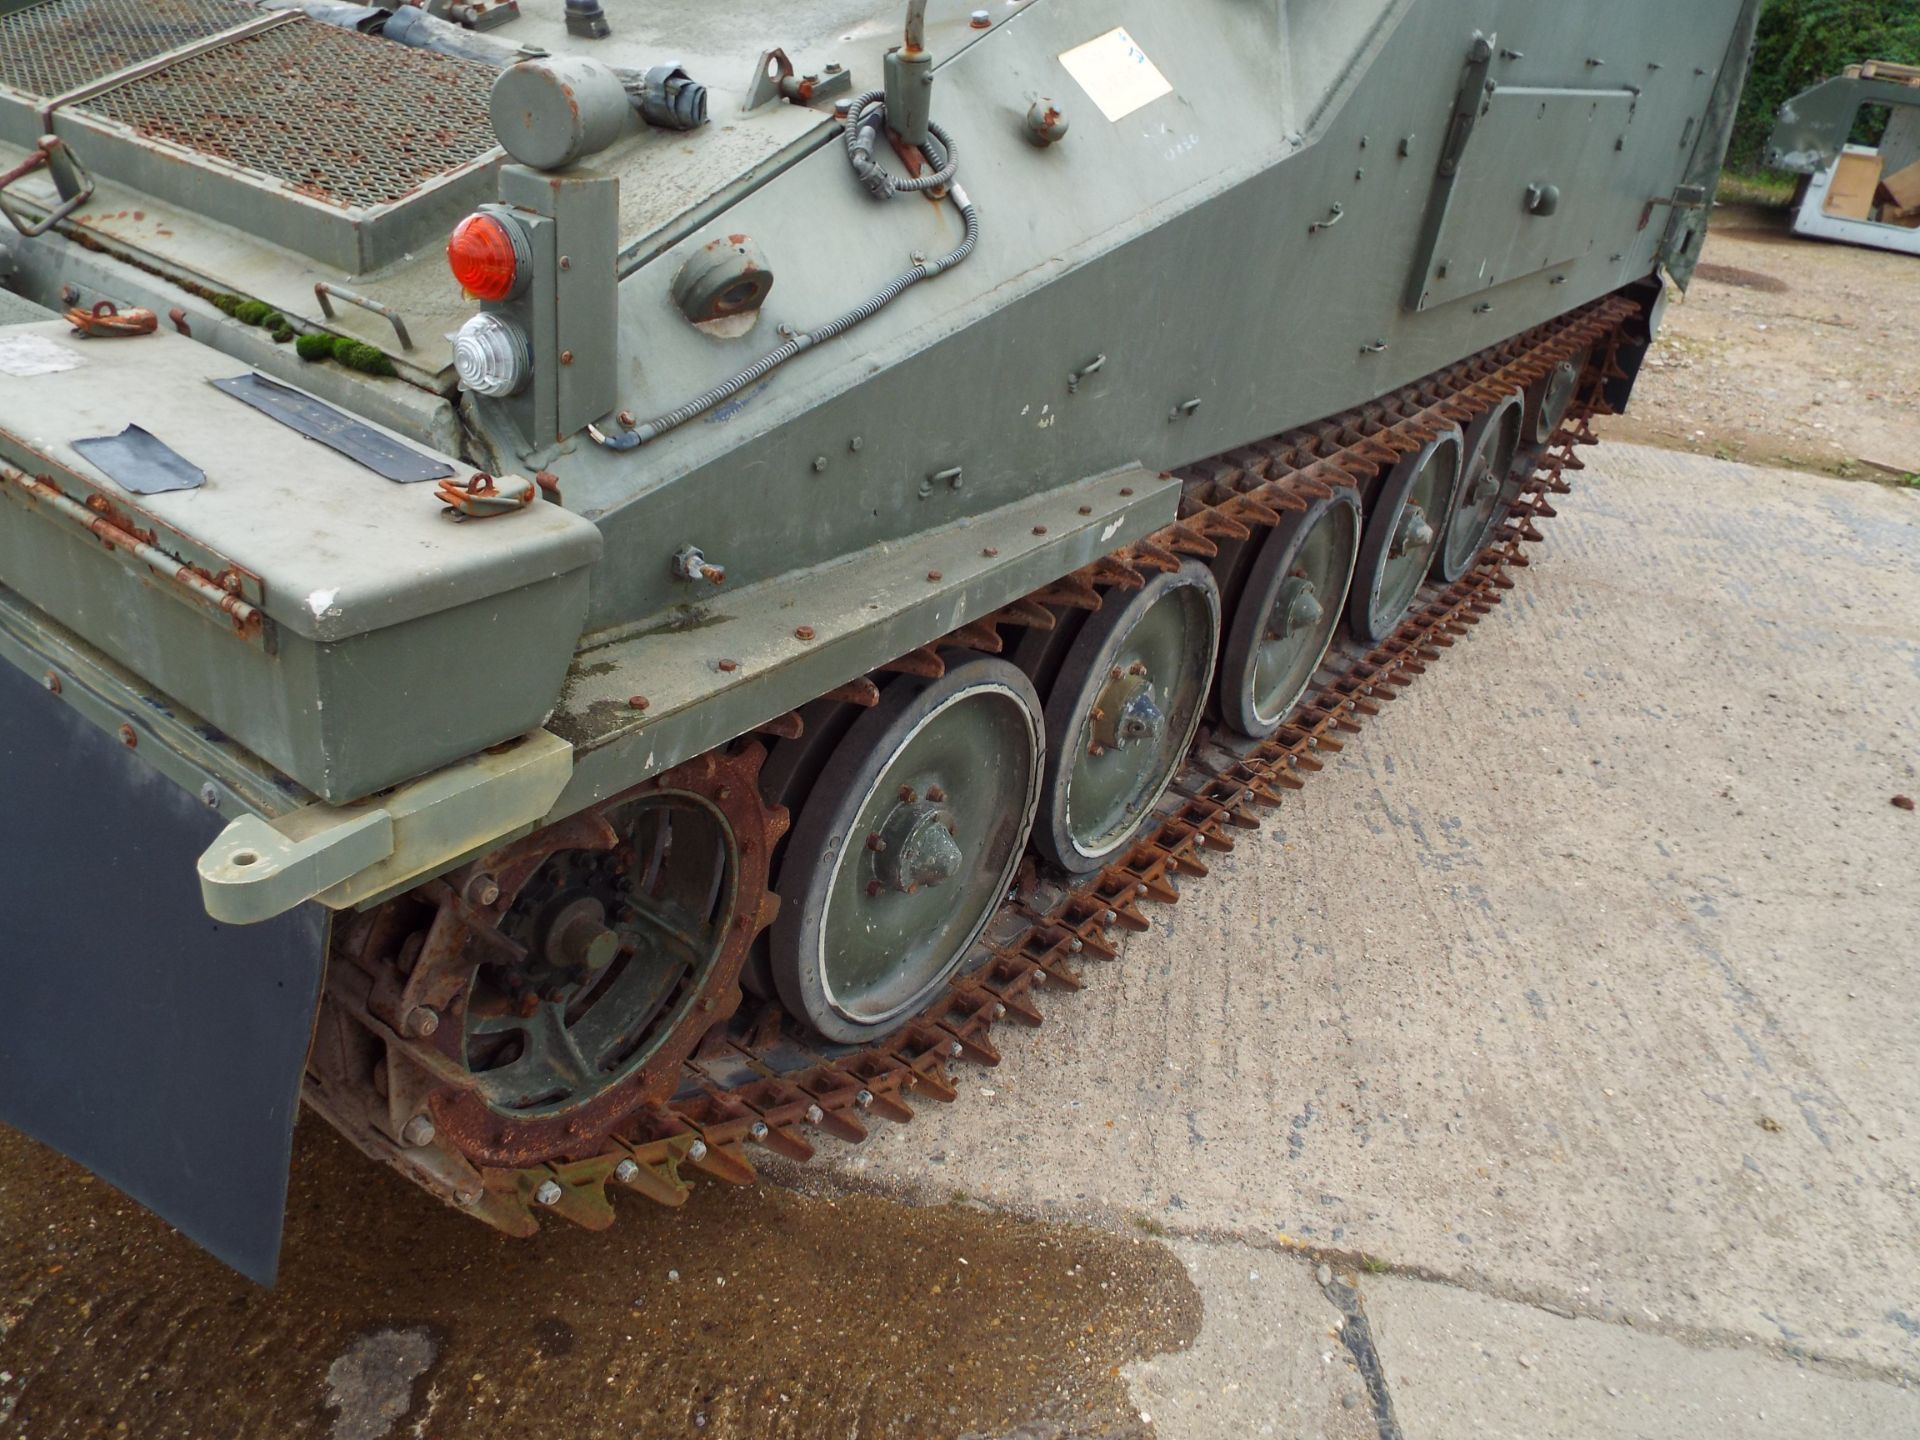 CVRT (Combat Vehicle Reconnaissance Tracked) FV105 Sultan Armoured Personnel Carrier - Image 26 of 30